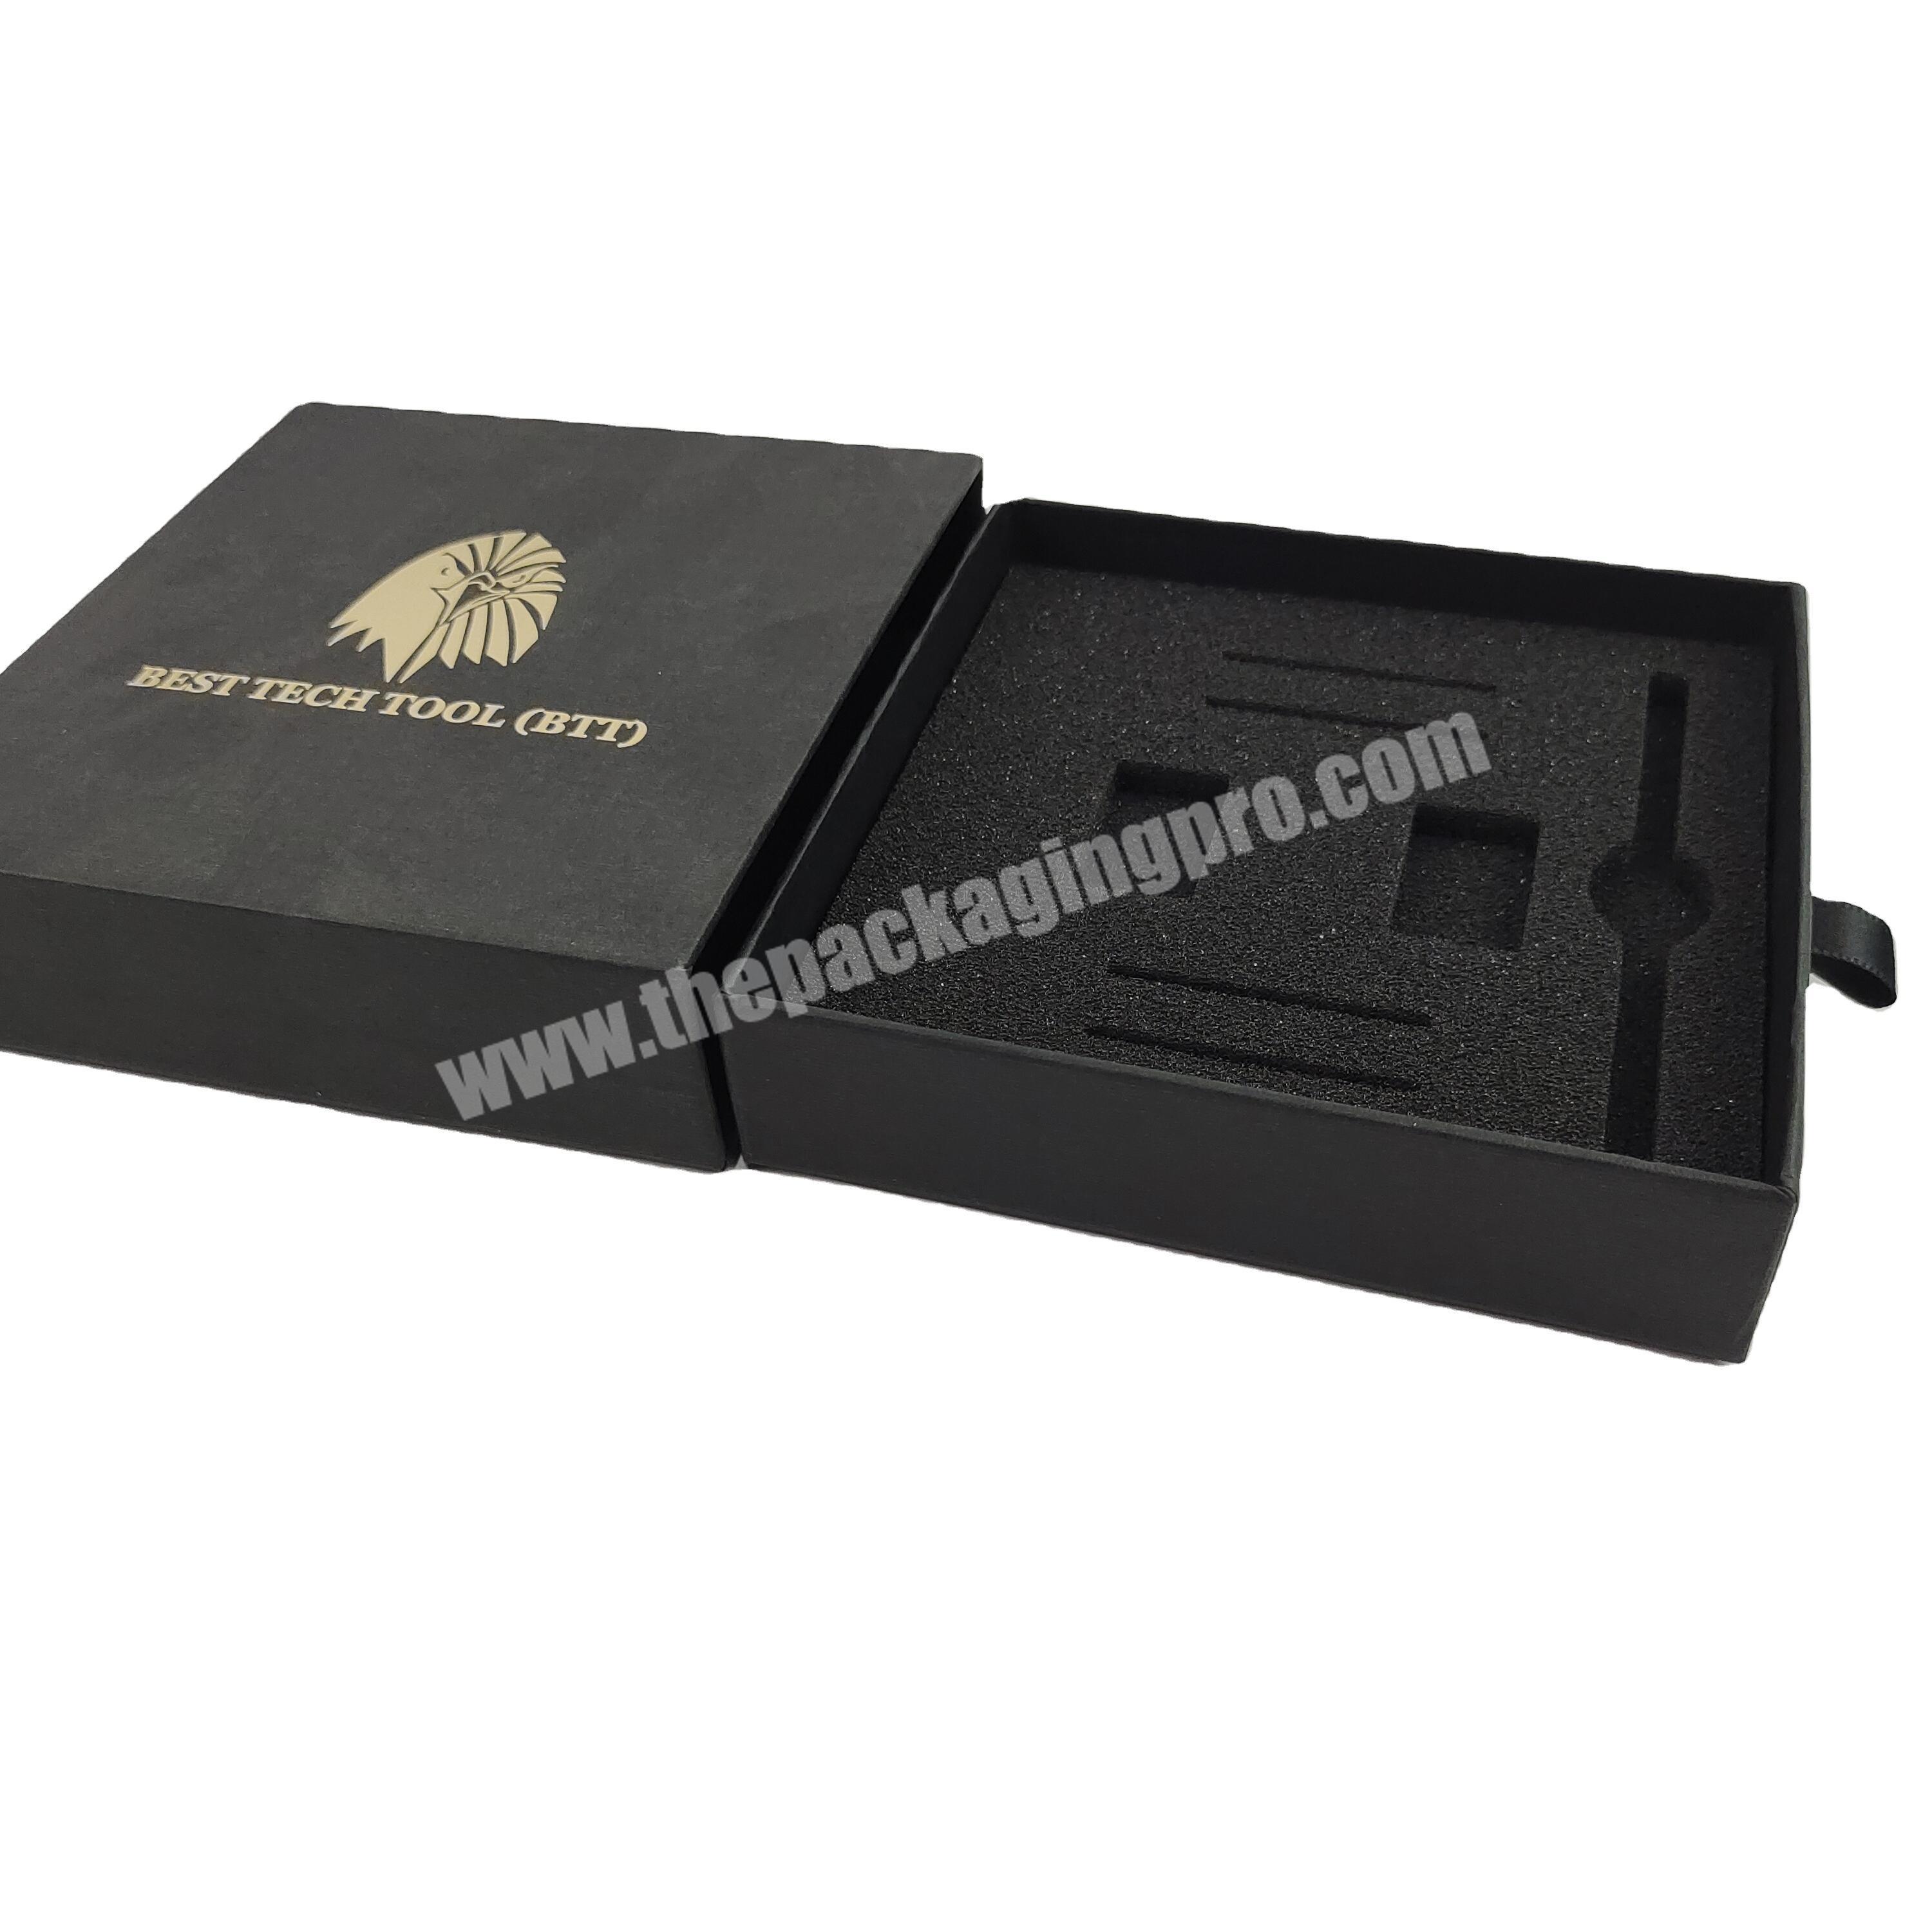 Inexpensive custom logo clothing exquisite gift boxes